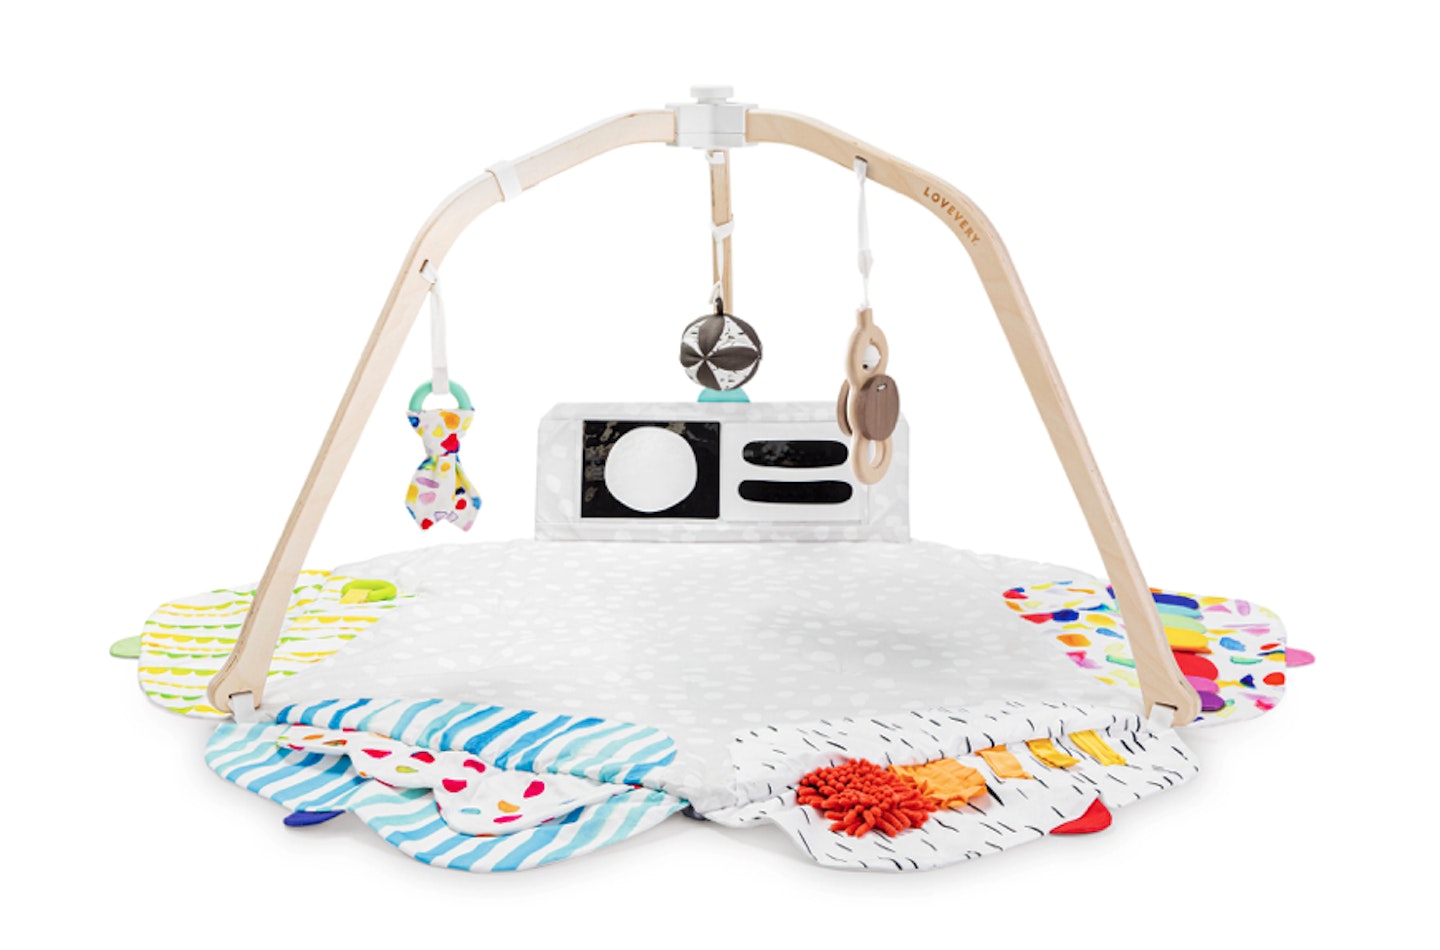 The Lovevery Play Gym can be used from newborn